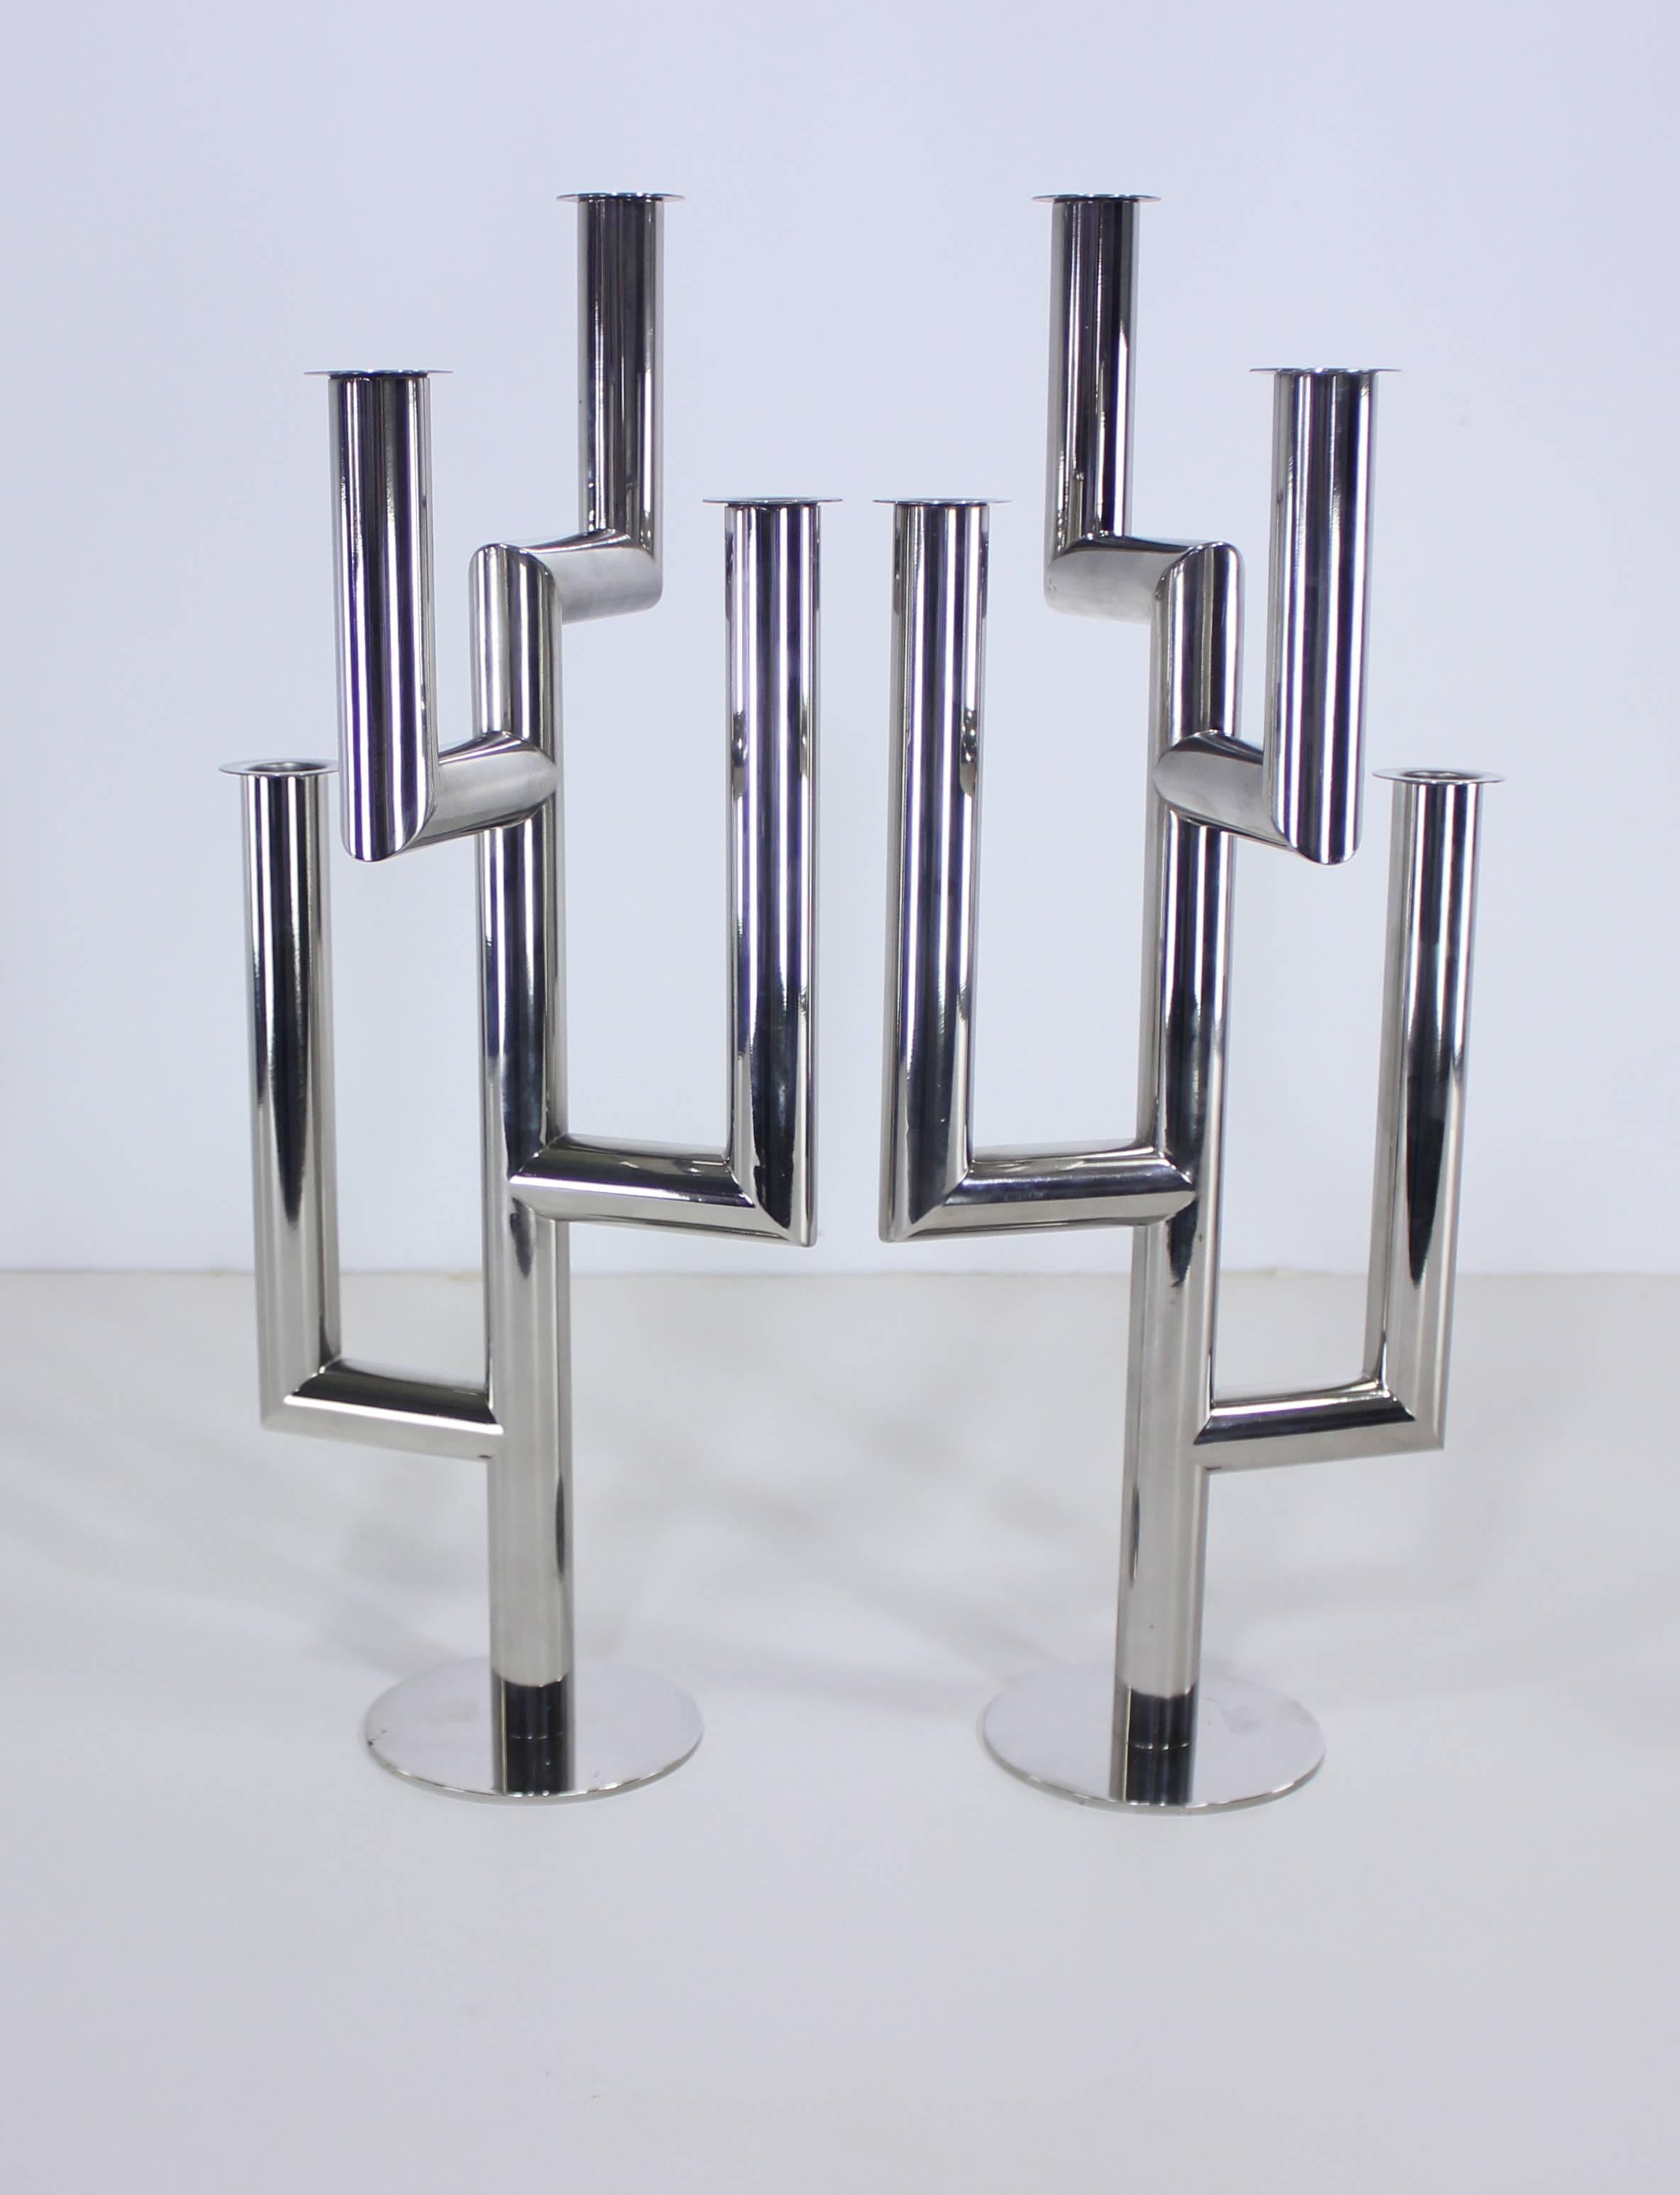 Rare pair of "Kaktus" or "Cactus" candelabra by Werkstatte Hagenauer Wien.
Rare mirror image set.
Complete with original candleholder inserts.
Viennese modernist, first exhibited at the 1930 Triennale di Milano.
Marked on the